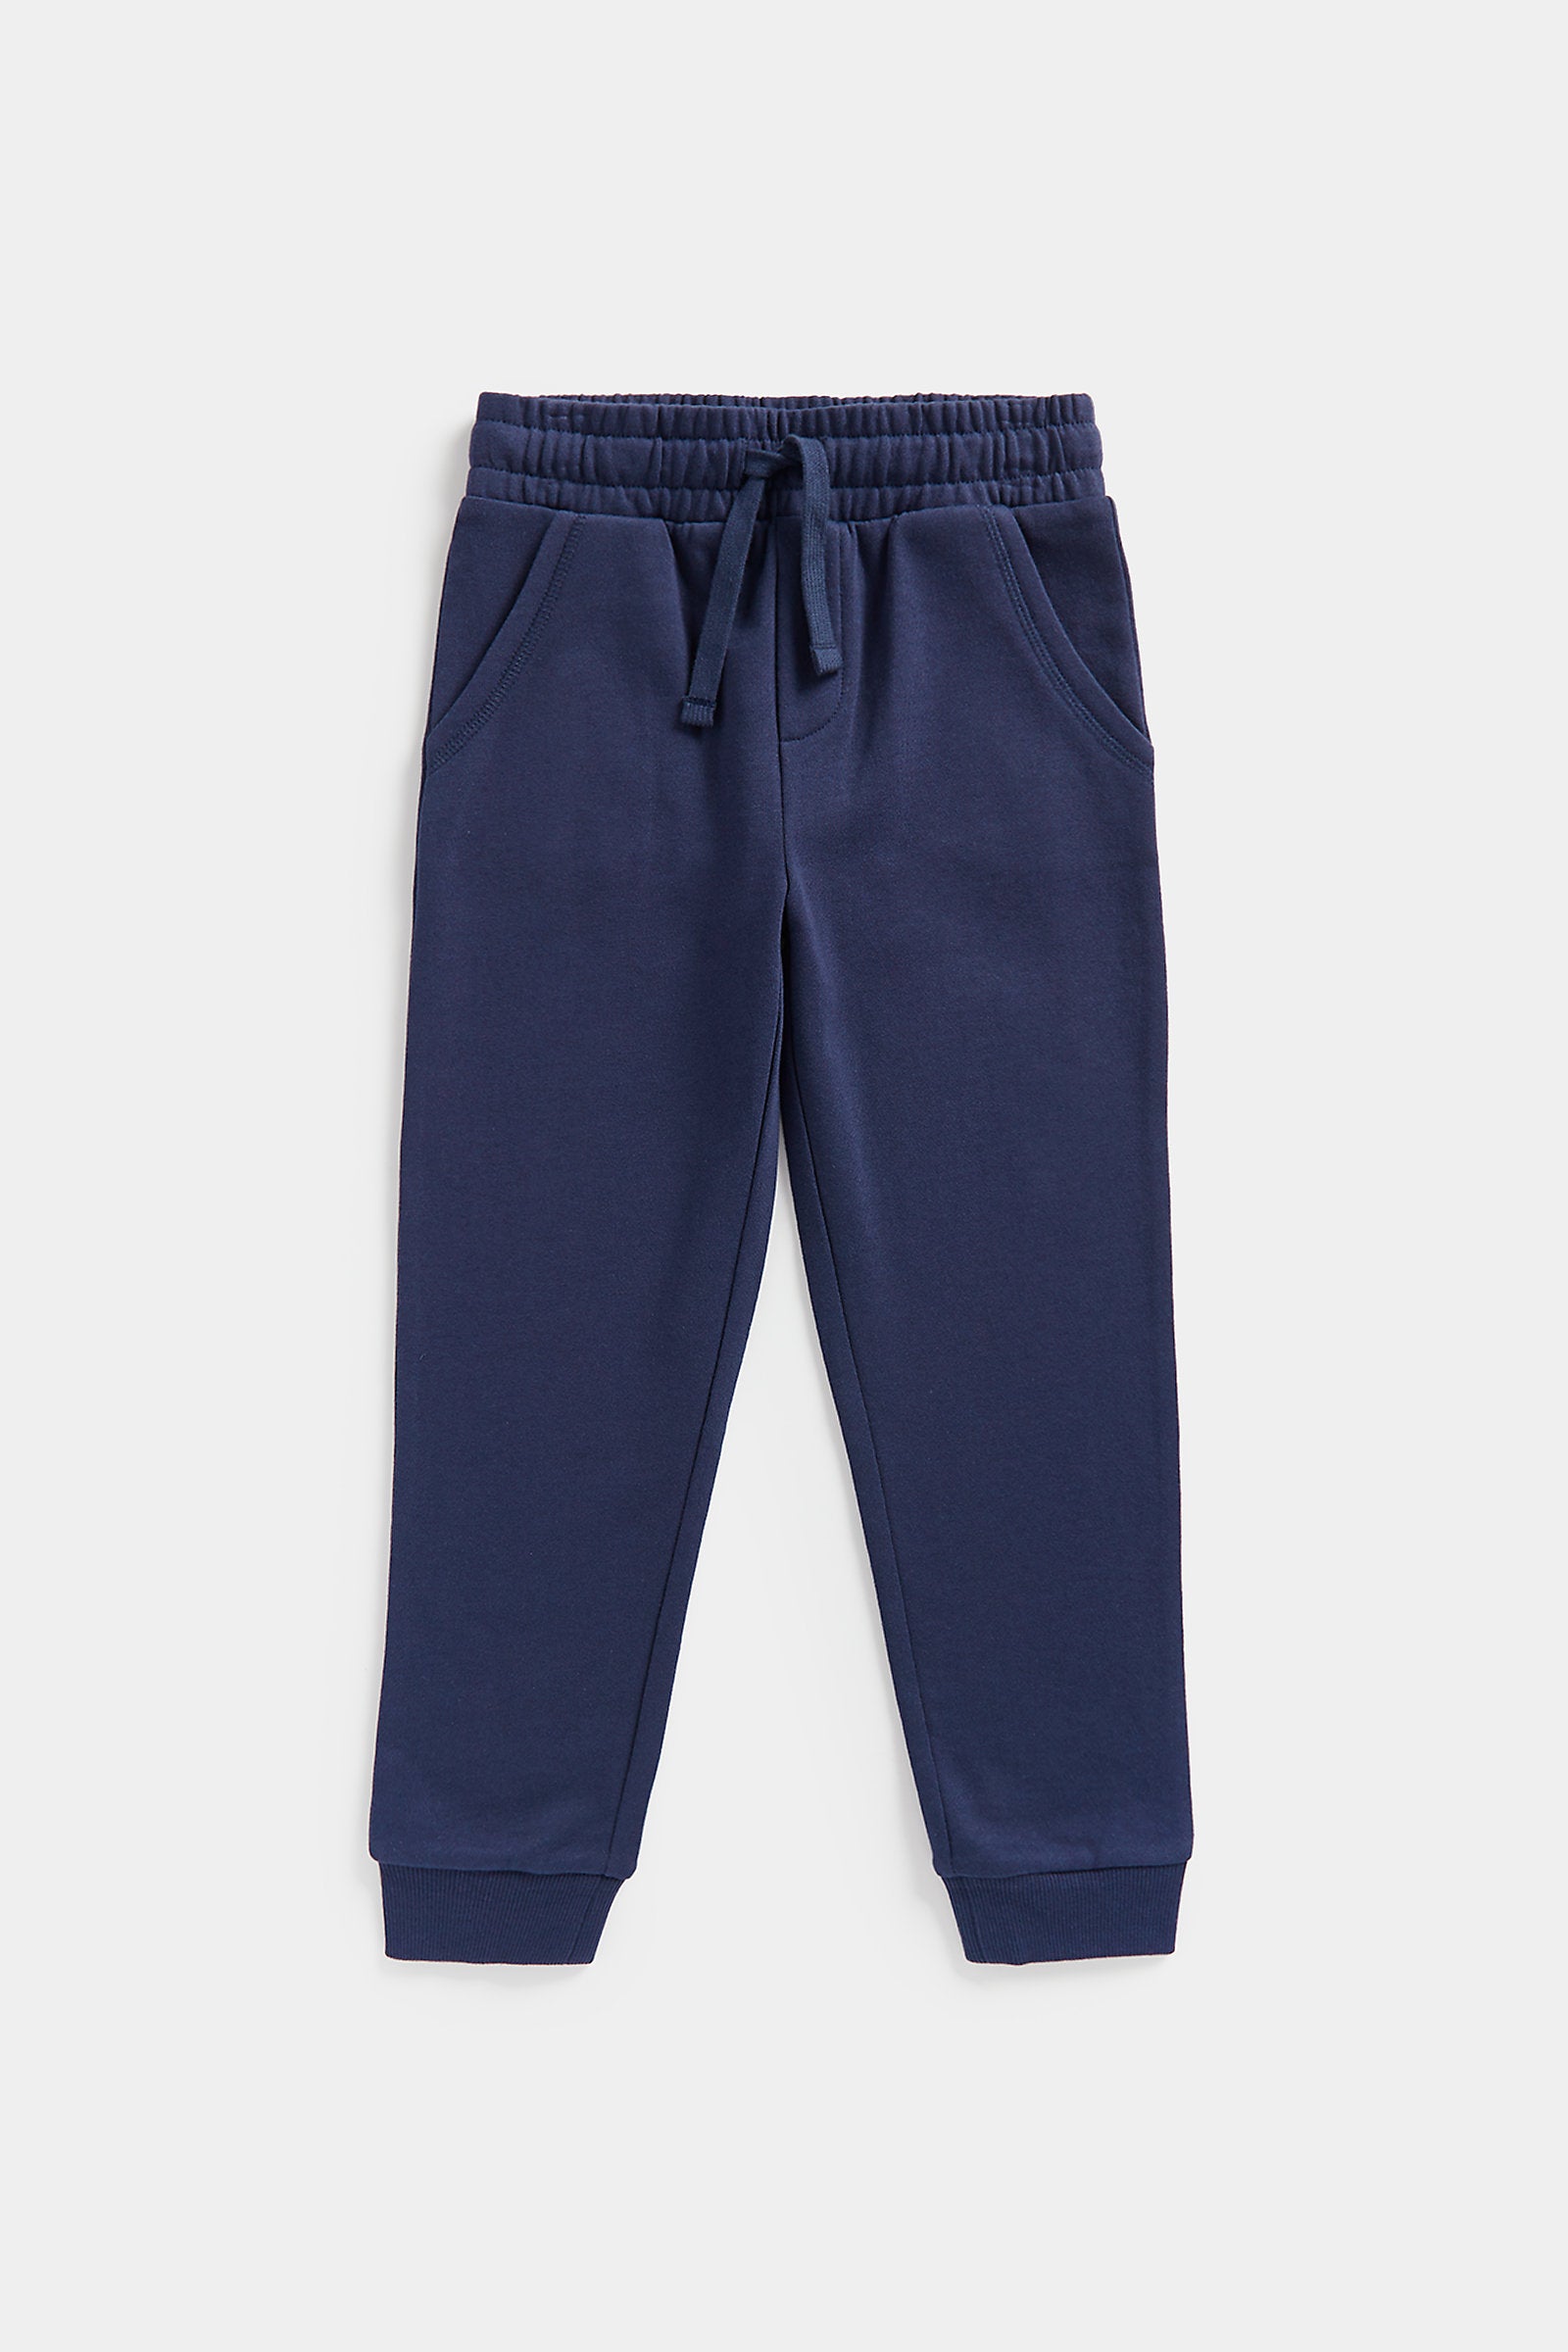 Mothercare Navy Joggers